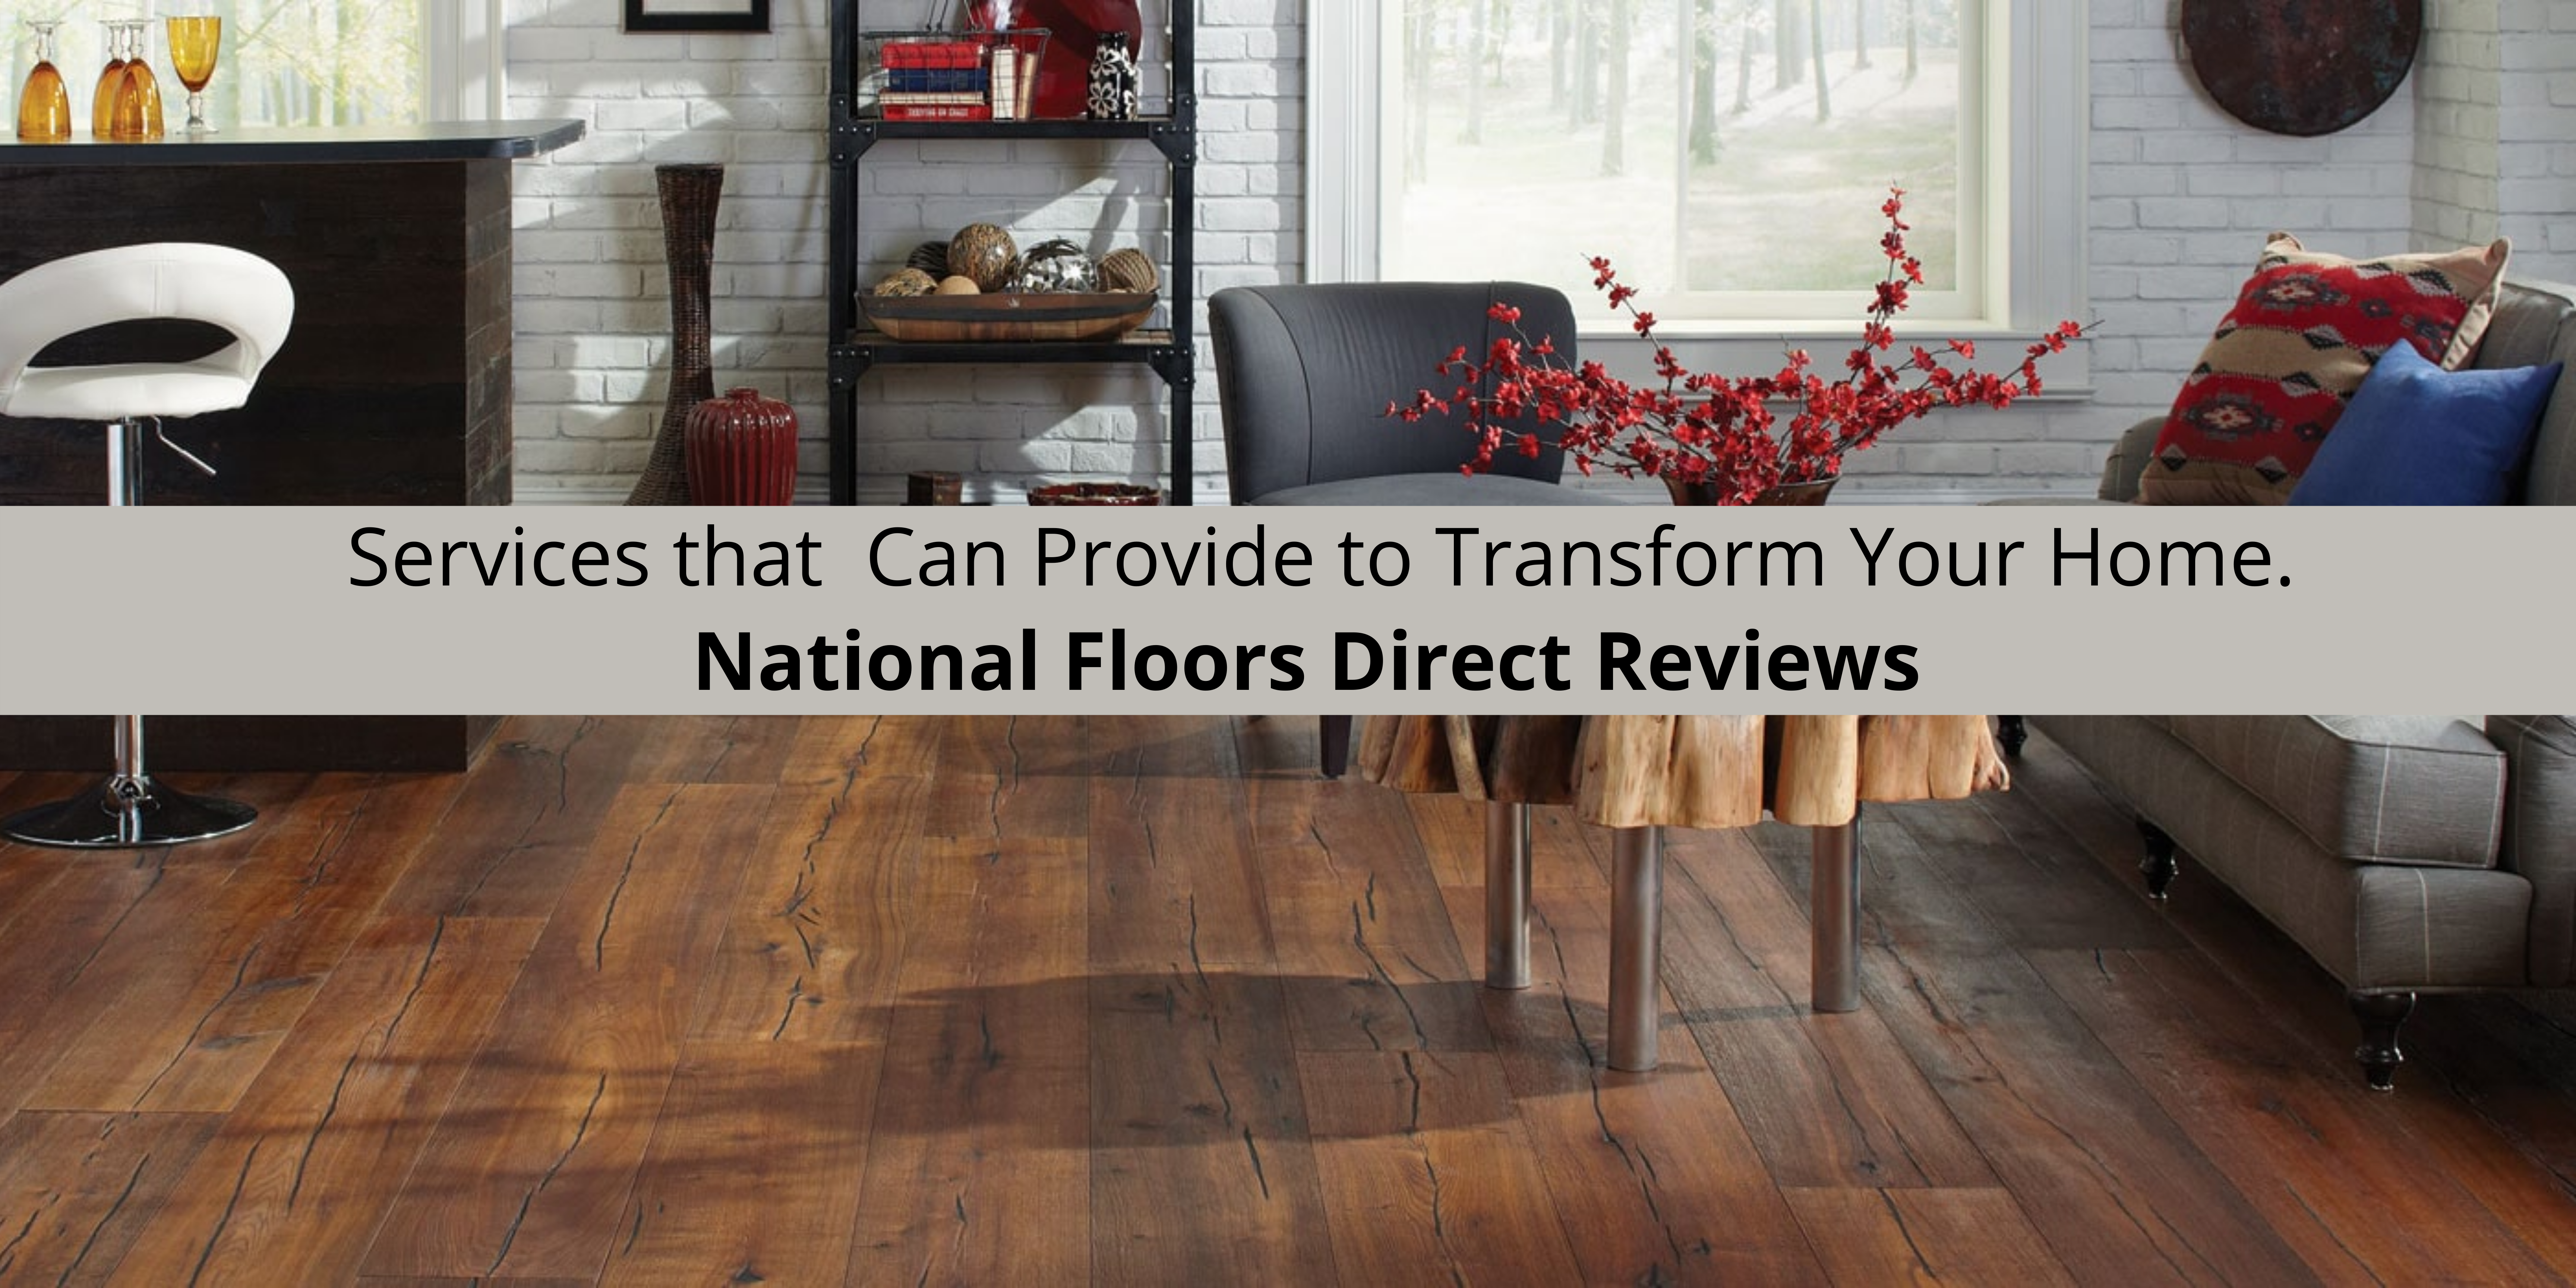 National Floors Direct Reviews Services that Can Provide to Transform